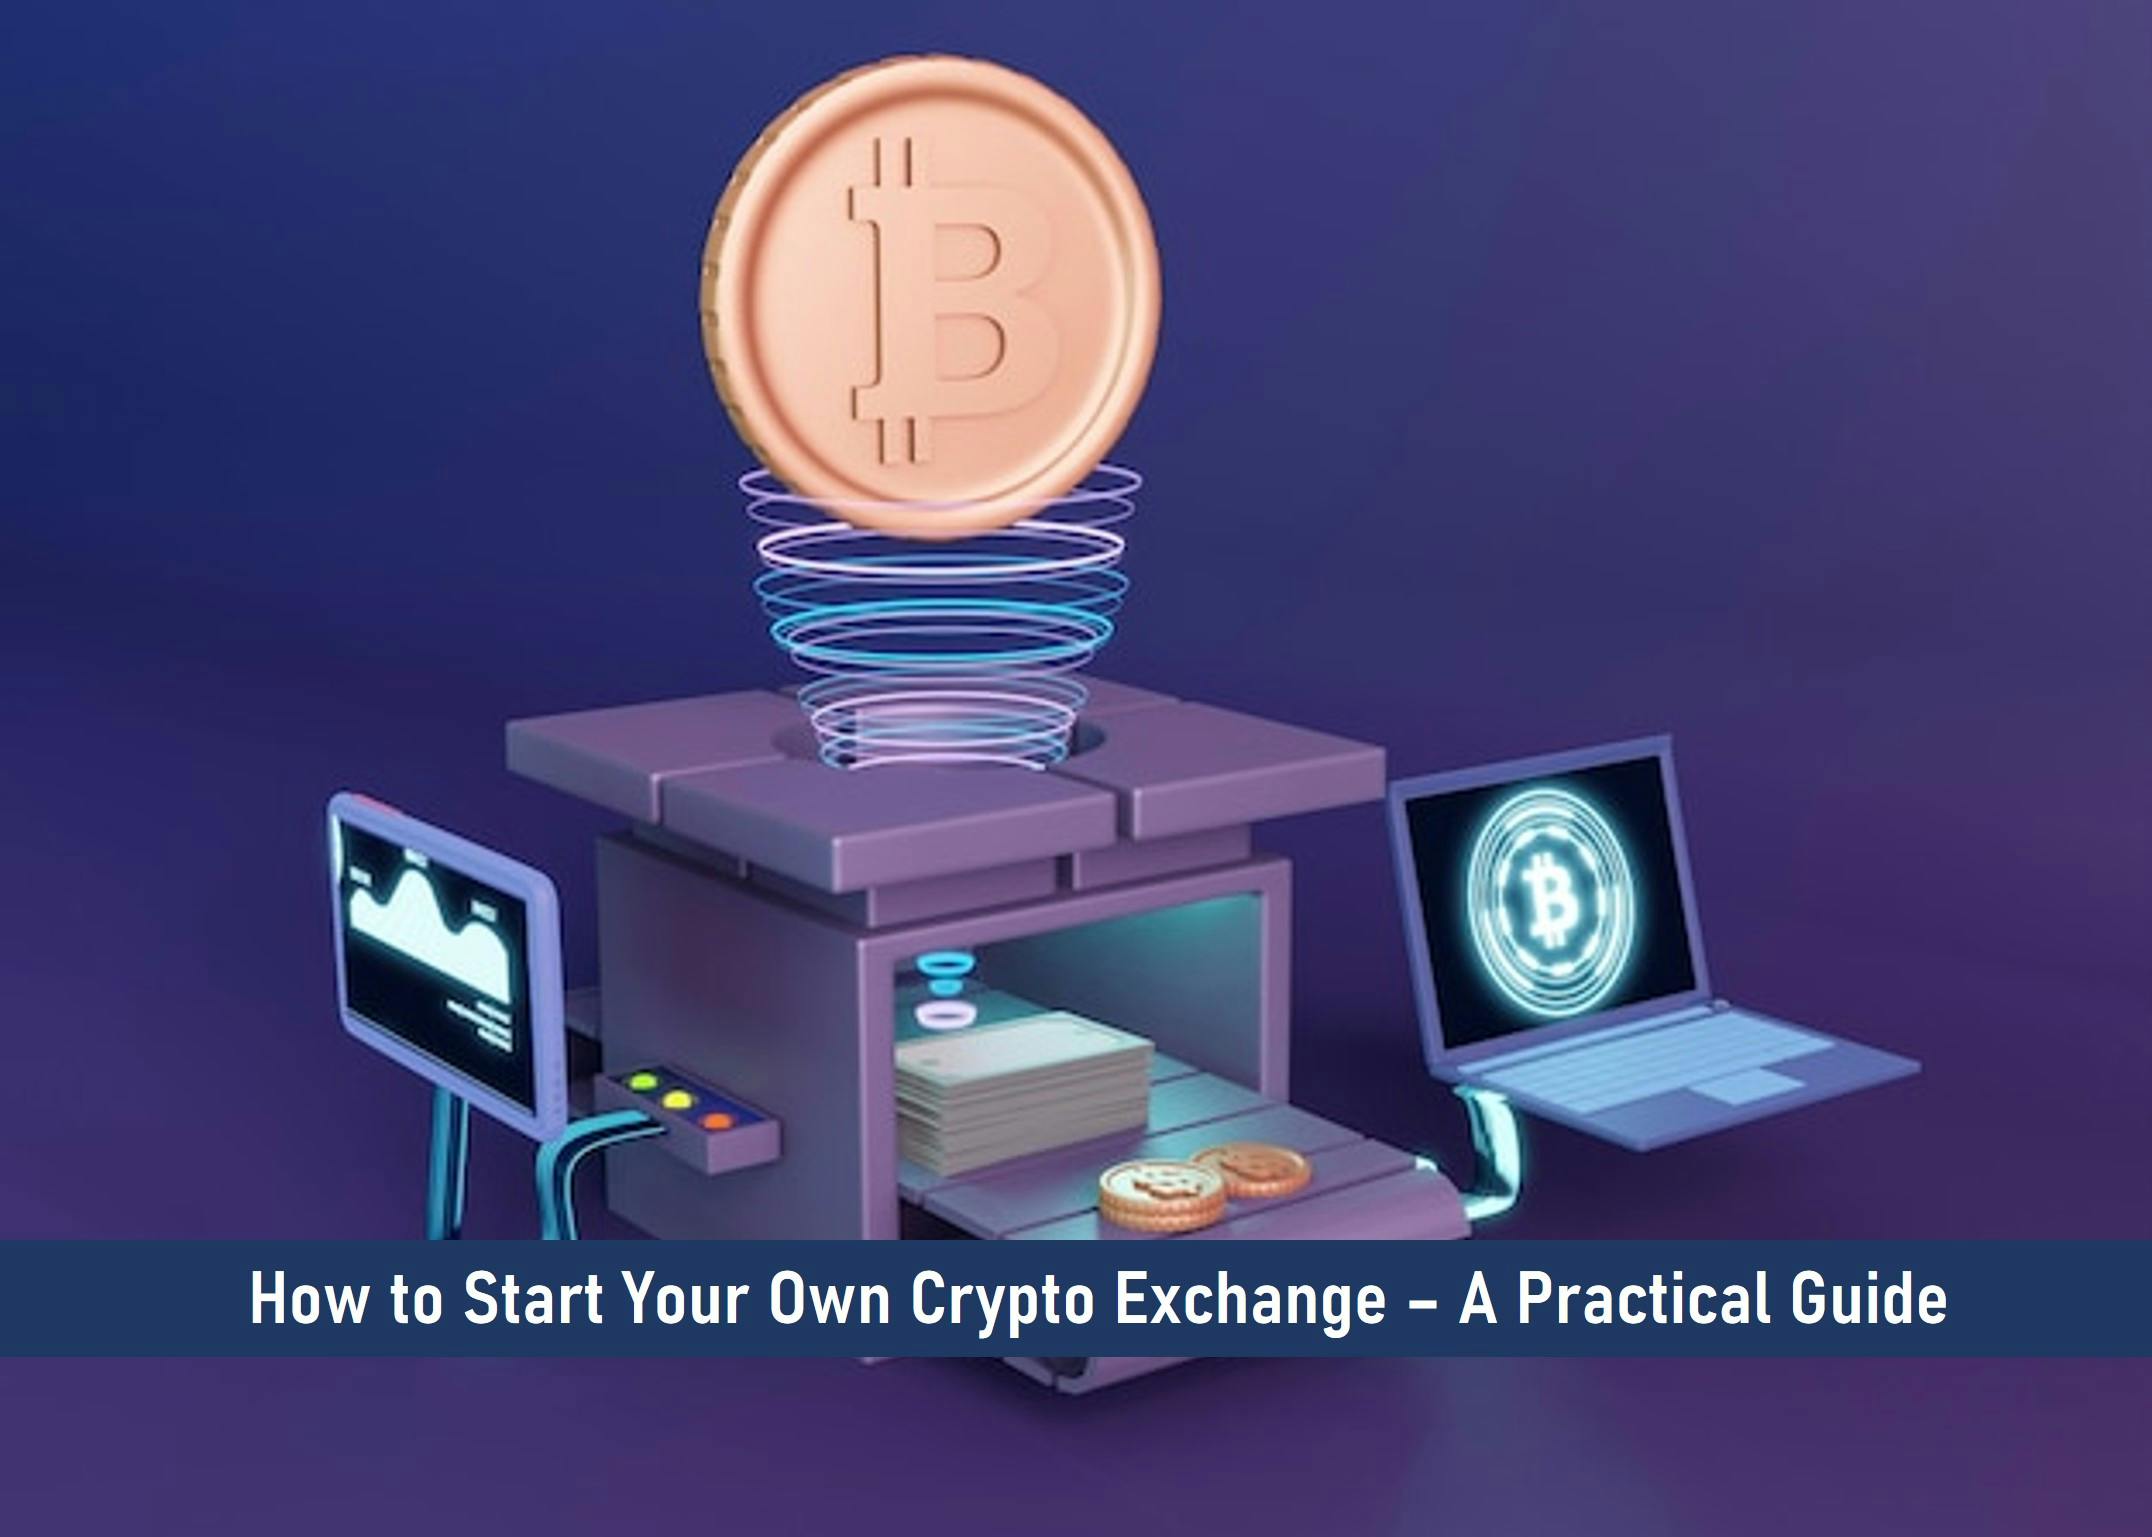 How to Start Your Own Crypto Exchange – A Practical Guide